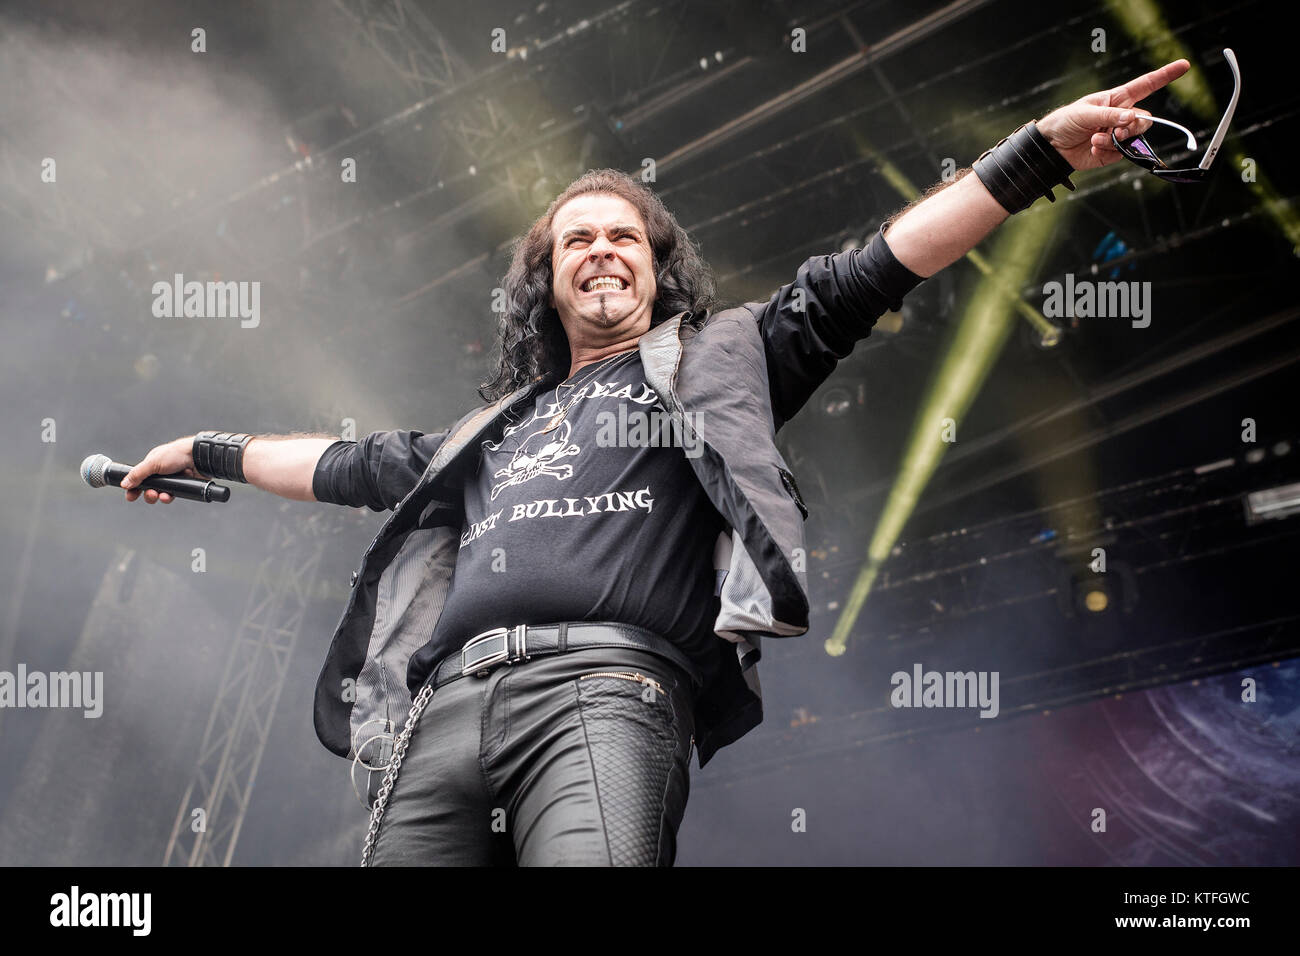 The Norwegian progressive metal band Pagan’s Mind performs a live concert at the Norwegian music festival Tons of Rock 2015. Here vocalist Nils K. Rue is seen live on stage. Norway, 19/06 2015. Stock Photo